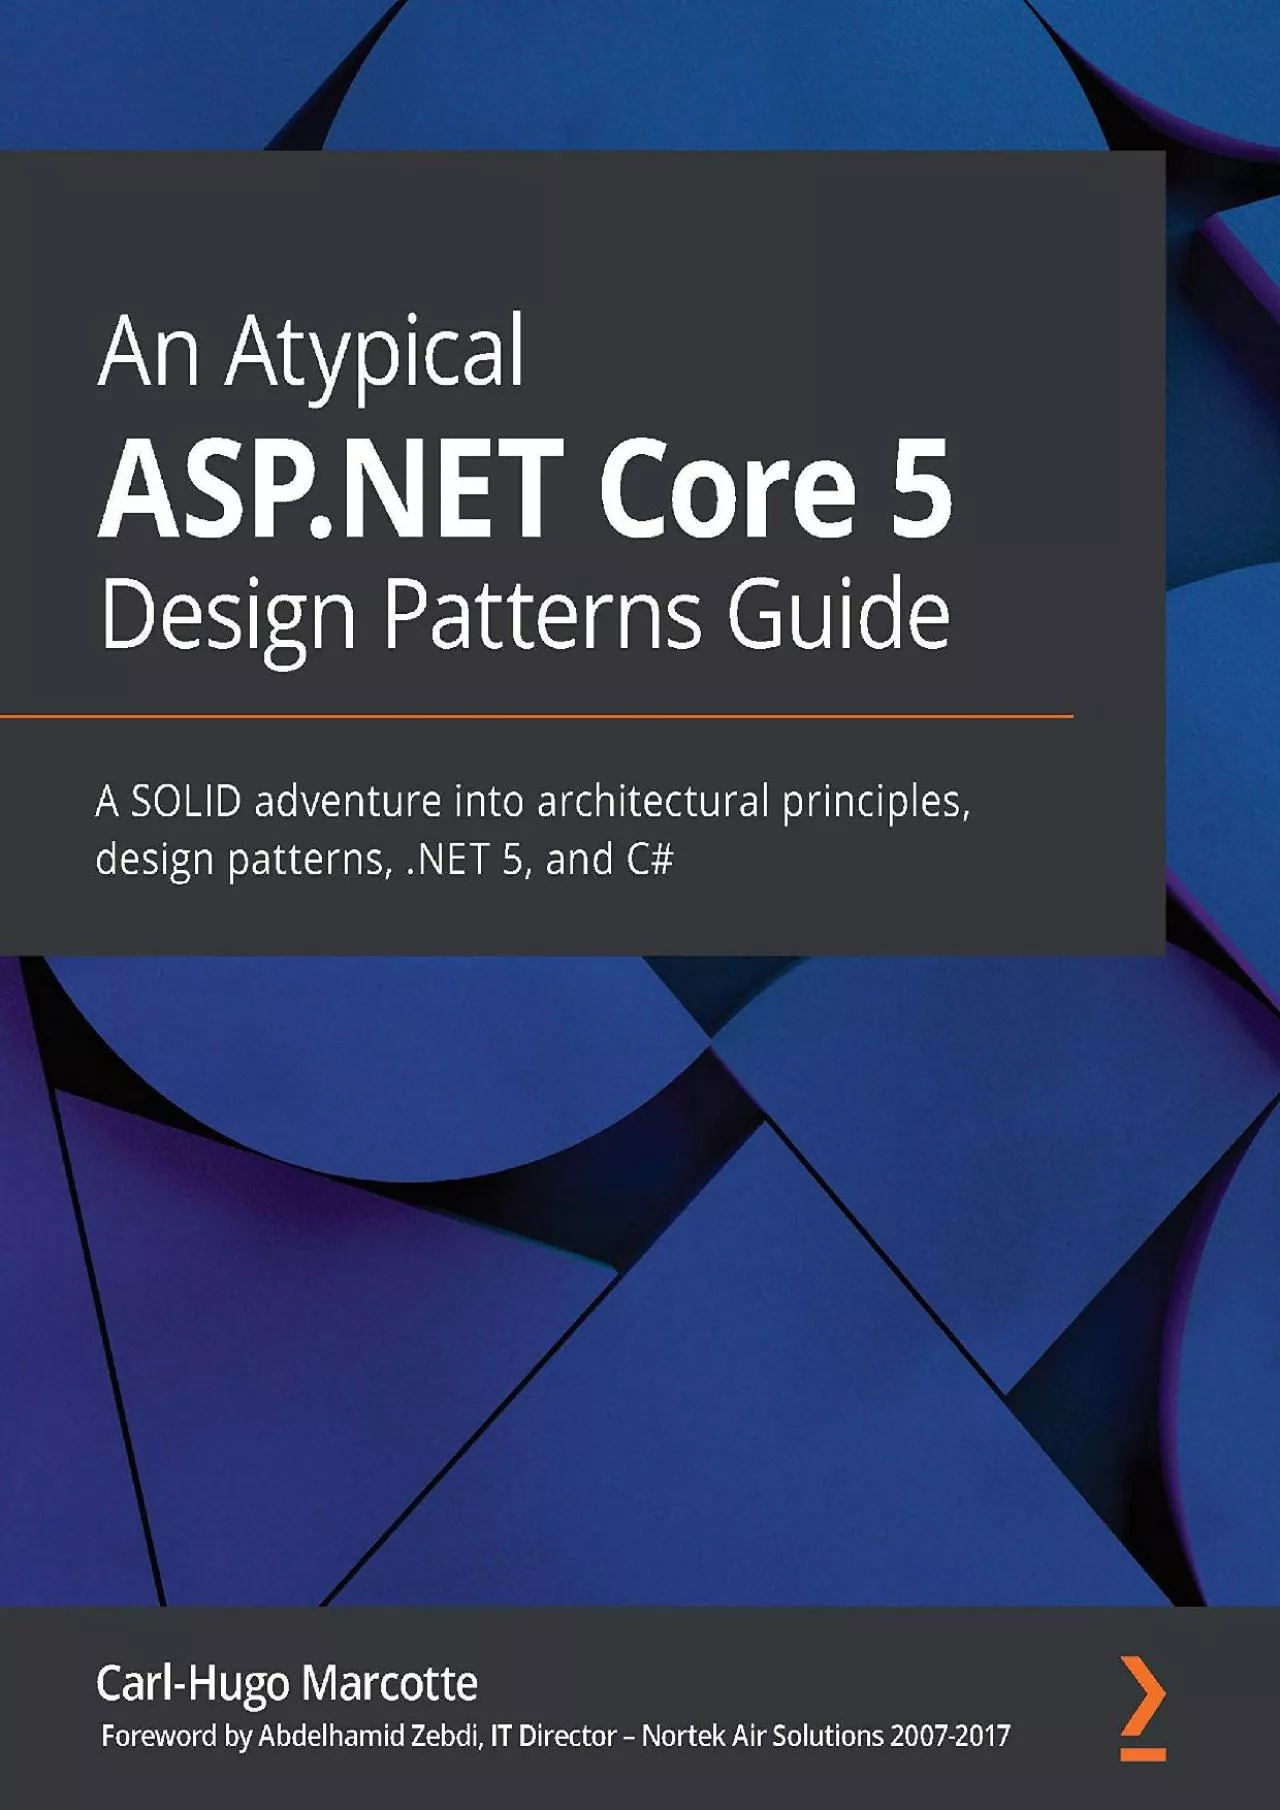 [eBOOK]-An Atypical ASP.NET Core 5 Design Patterns Guide: A SOLID adventure into architectural